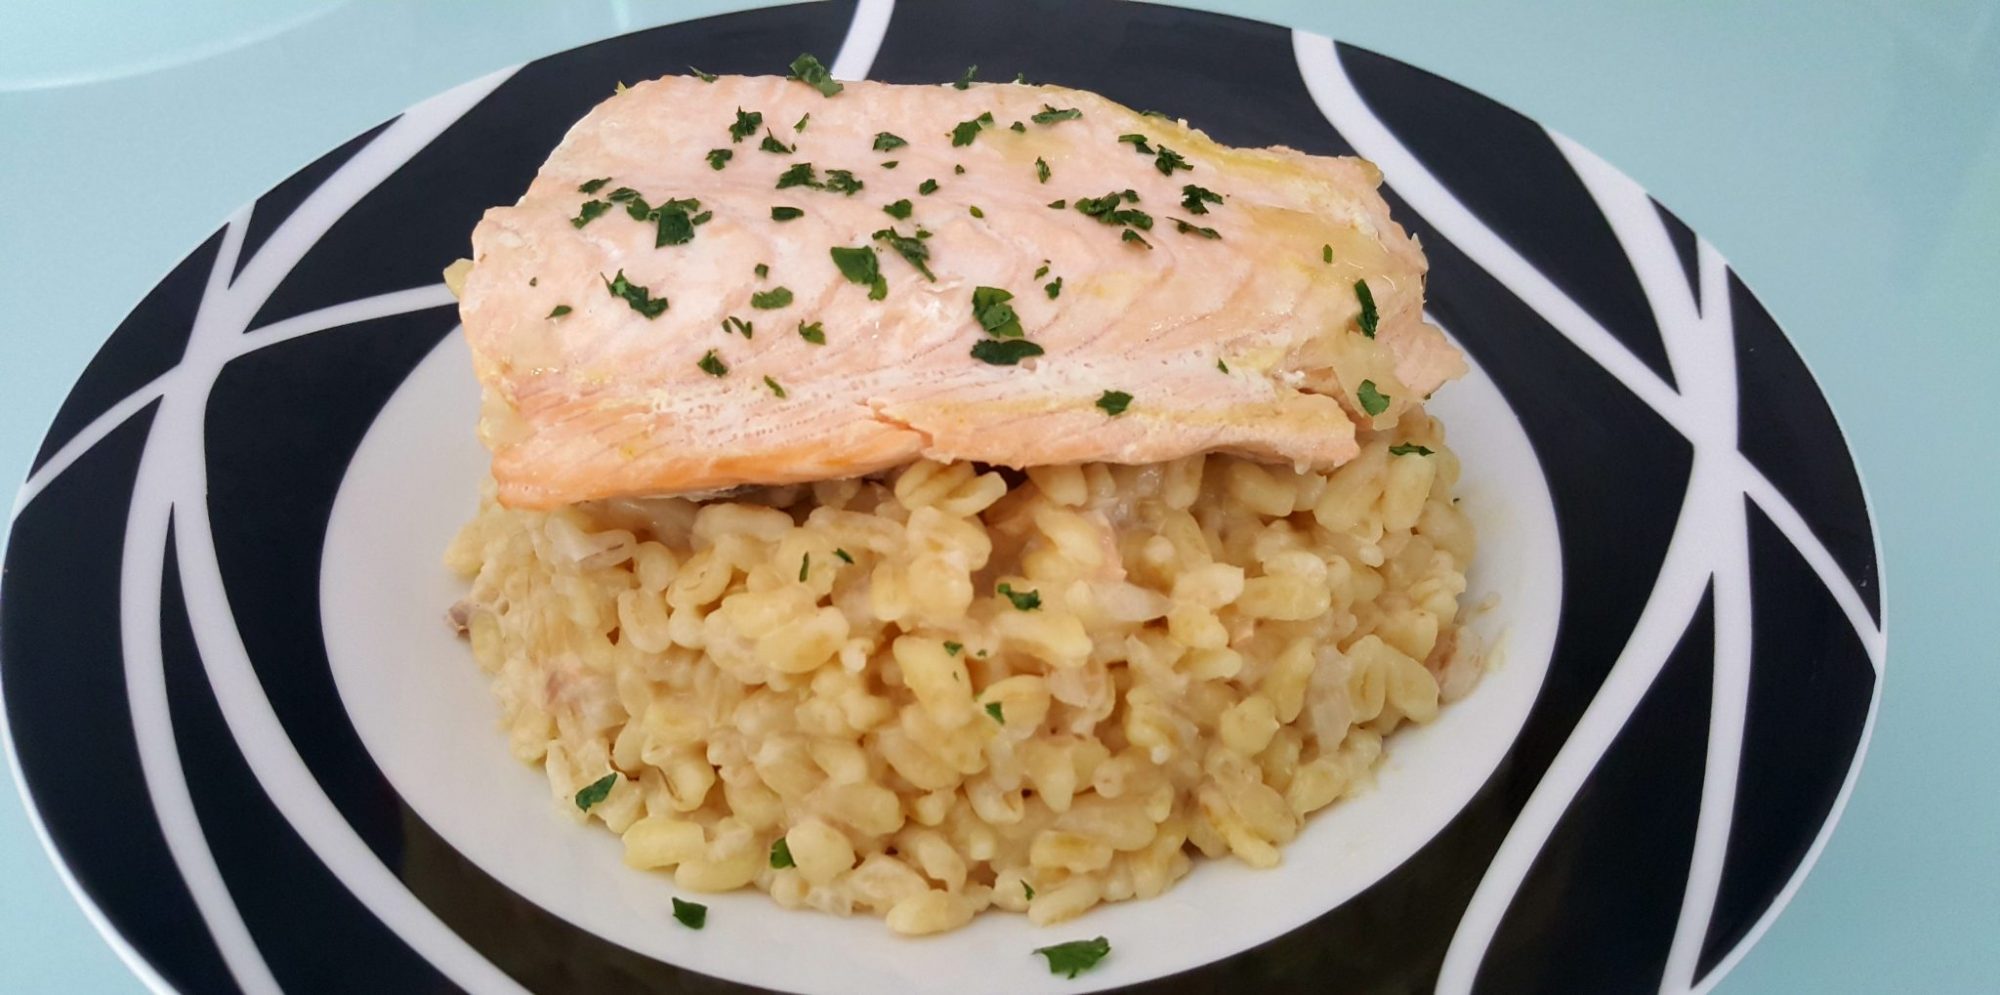 Salmon with precooked wheat (Ebly) and cream